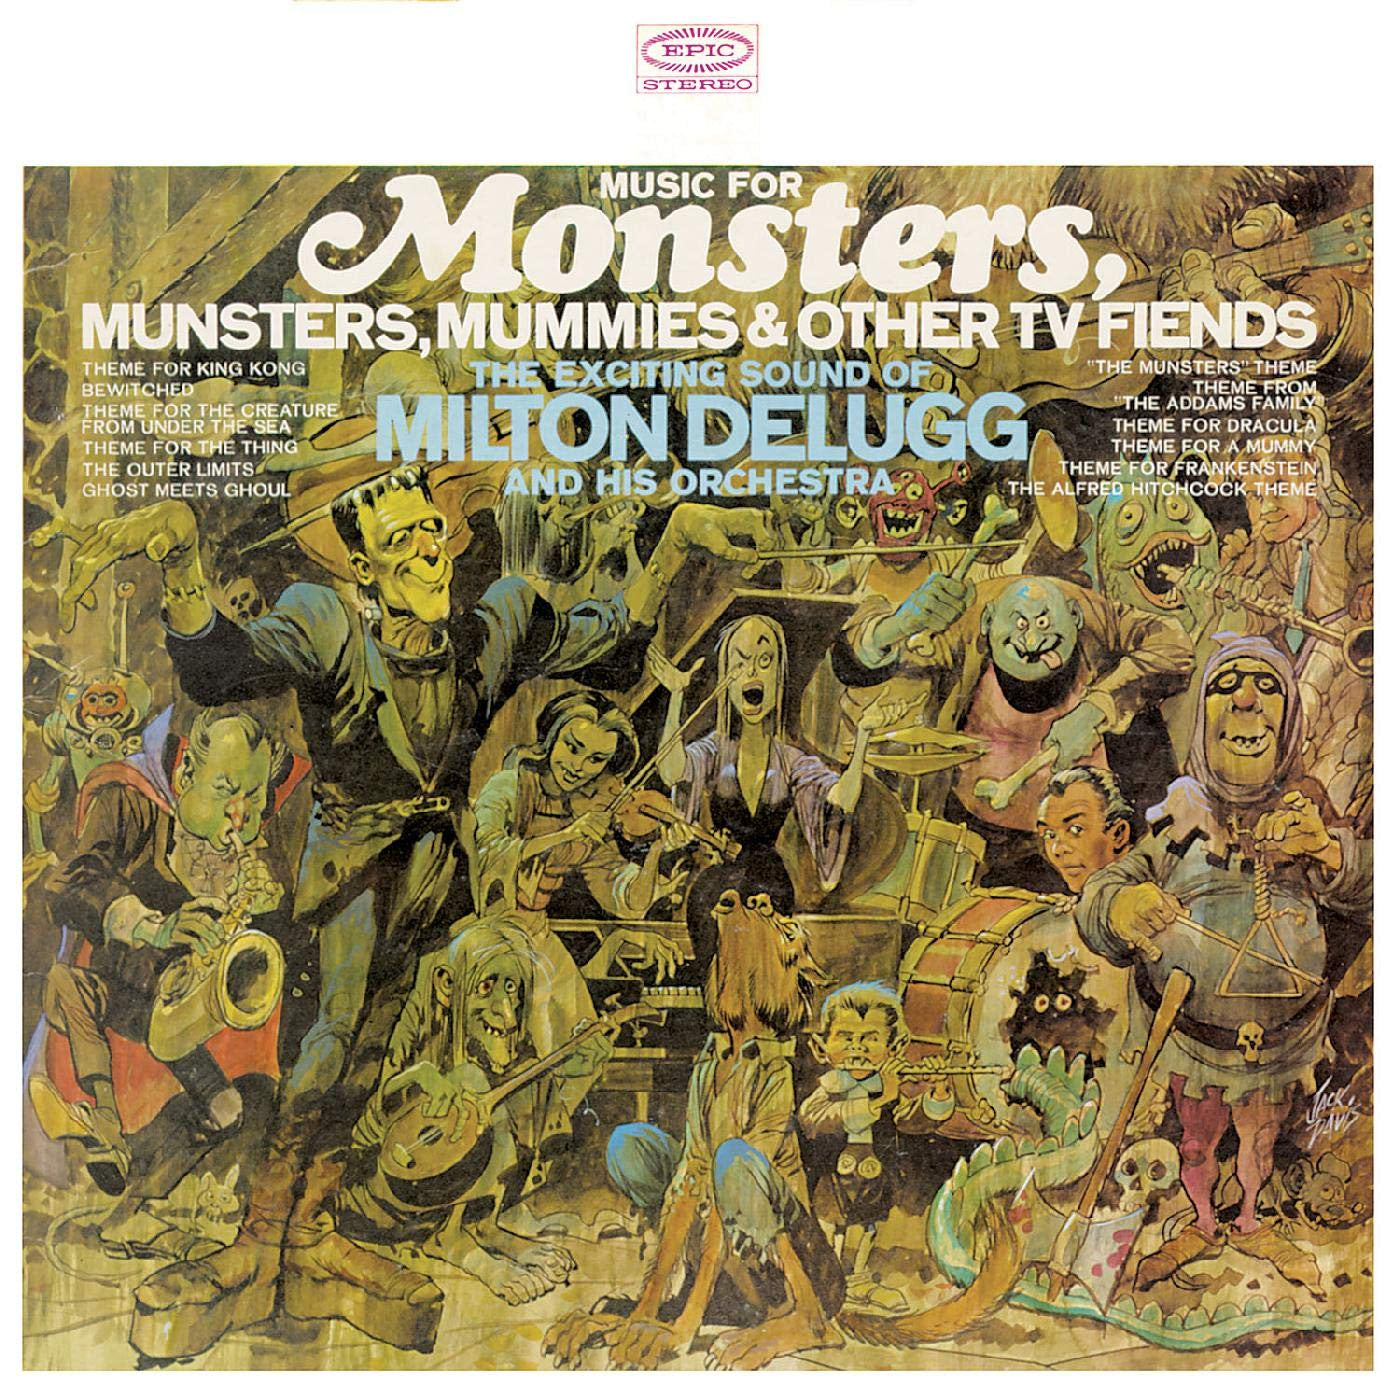 Milton DeLugg And His Orchestra ‎– Music For Monsters, Munsters, Mummies & Other TV Fiends - New LP Record 2019 Real Gone Music Limited Edition 45rpm Orange Pumpkin Colored Vinyl - Halloween / Novelty / Theme Songs